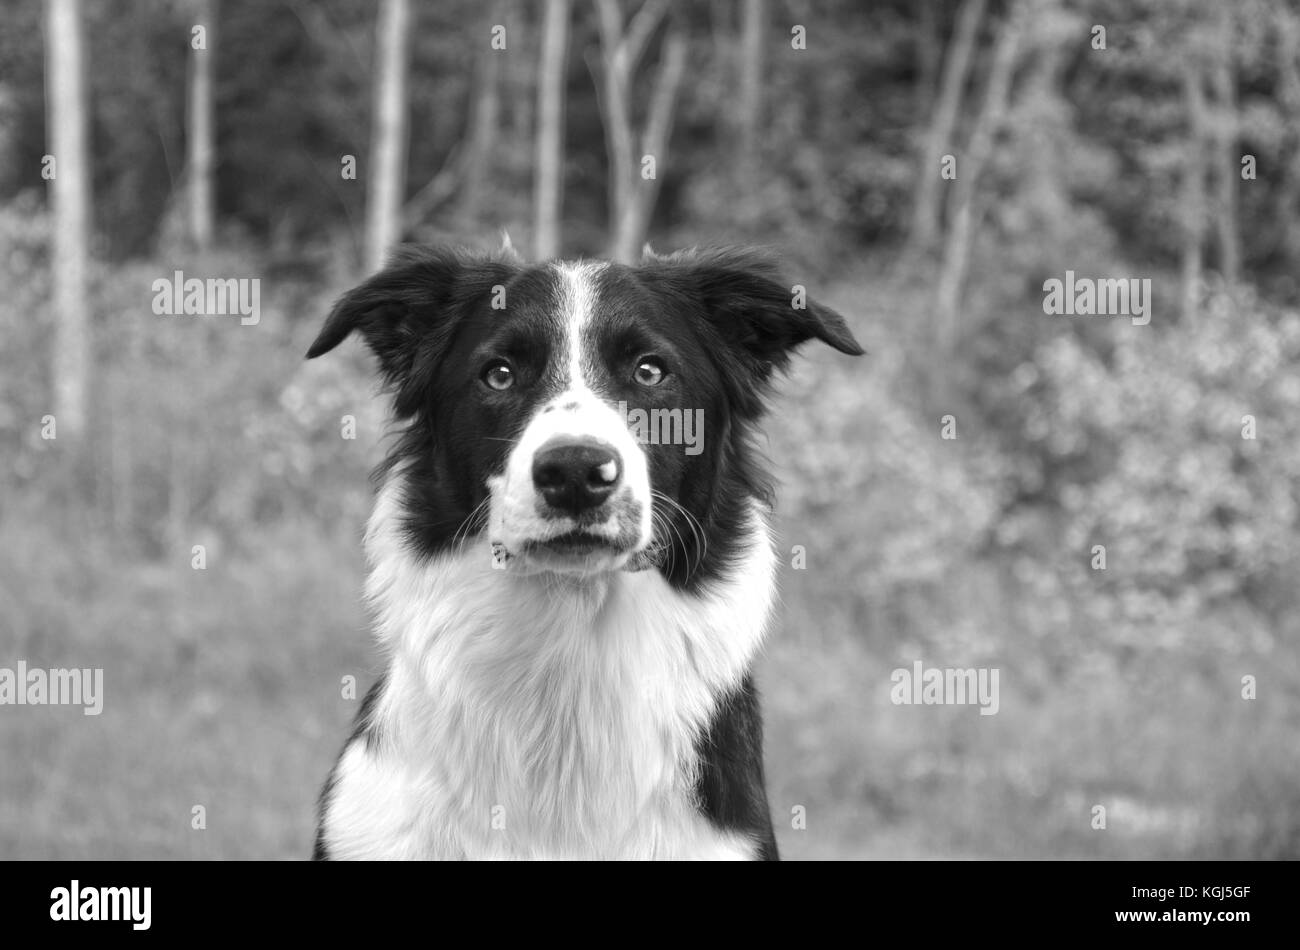 Border Collie full front profile view with trees in the background. A very focused dog in black and white. Stock Photo